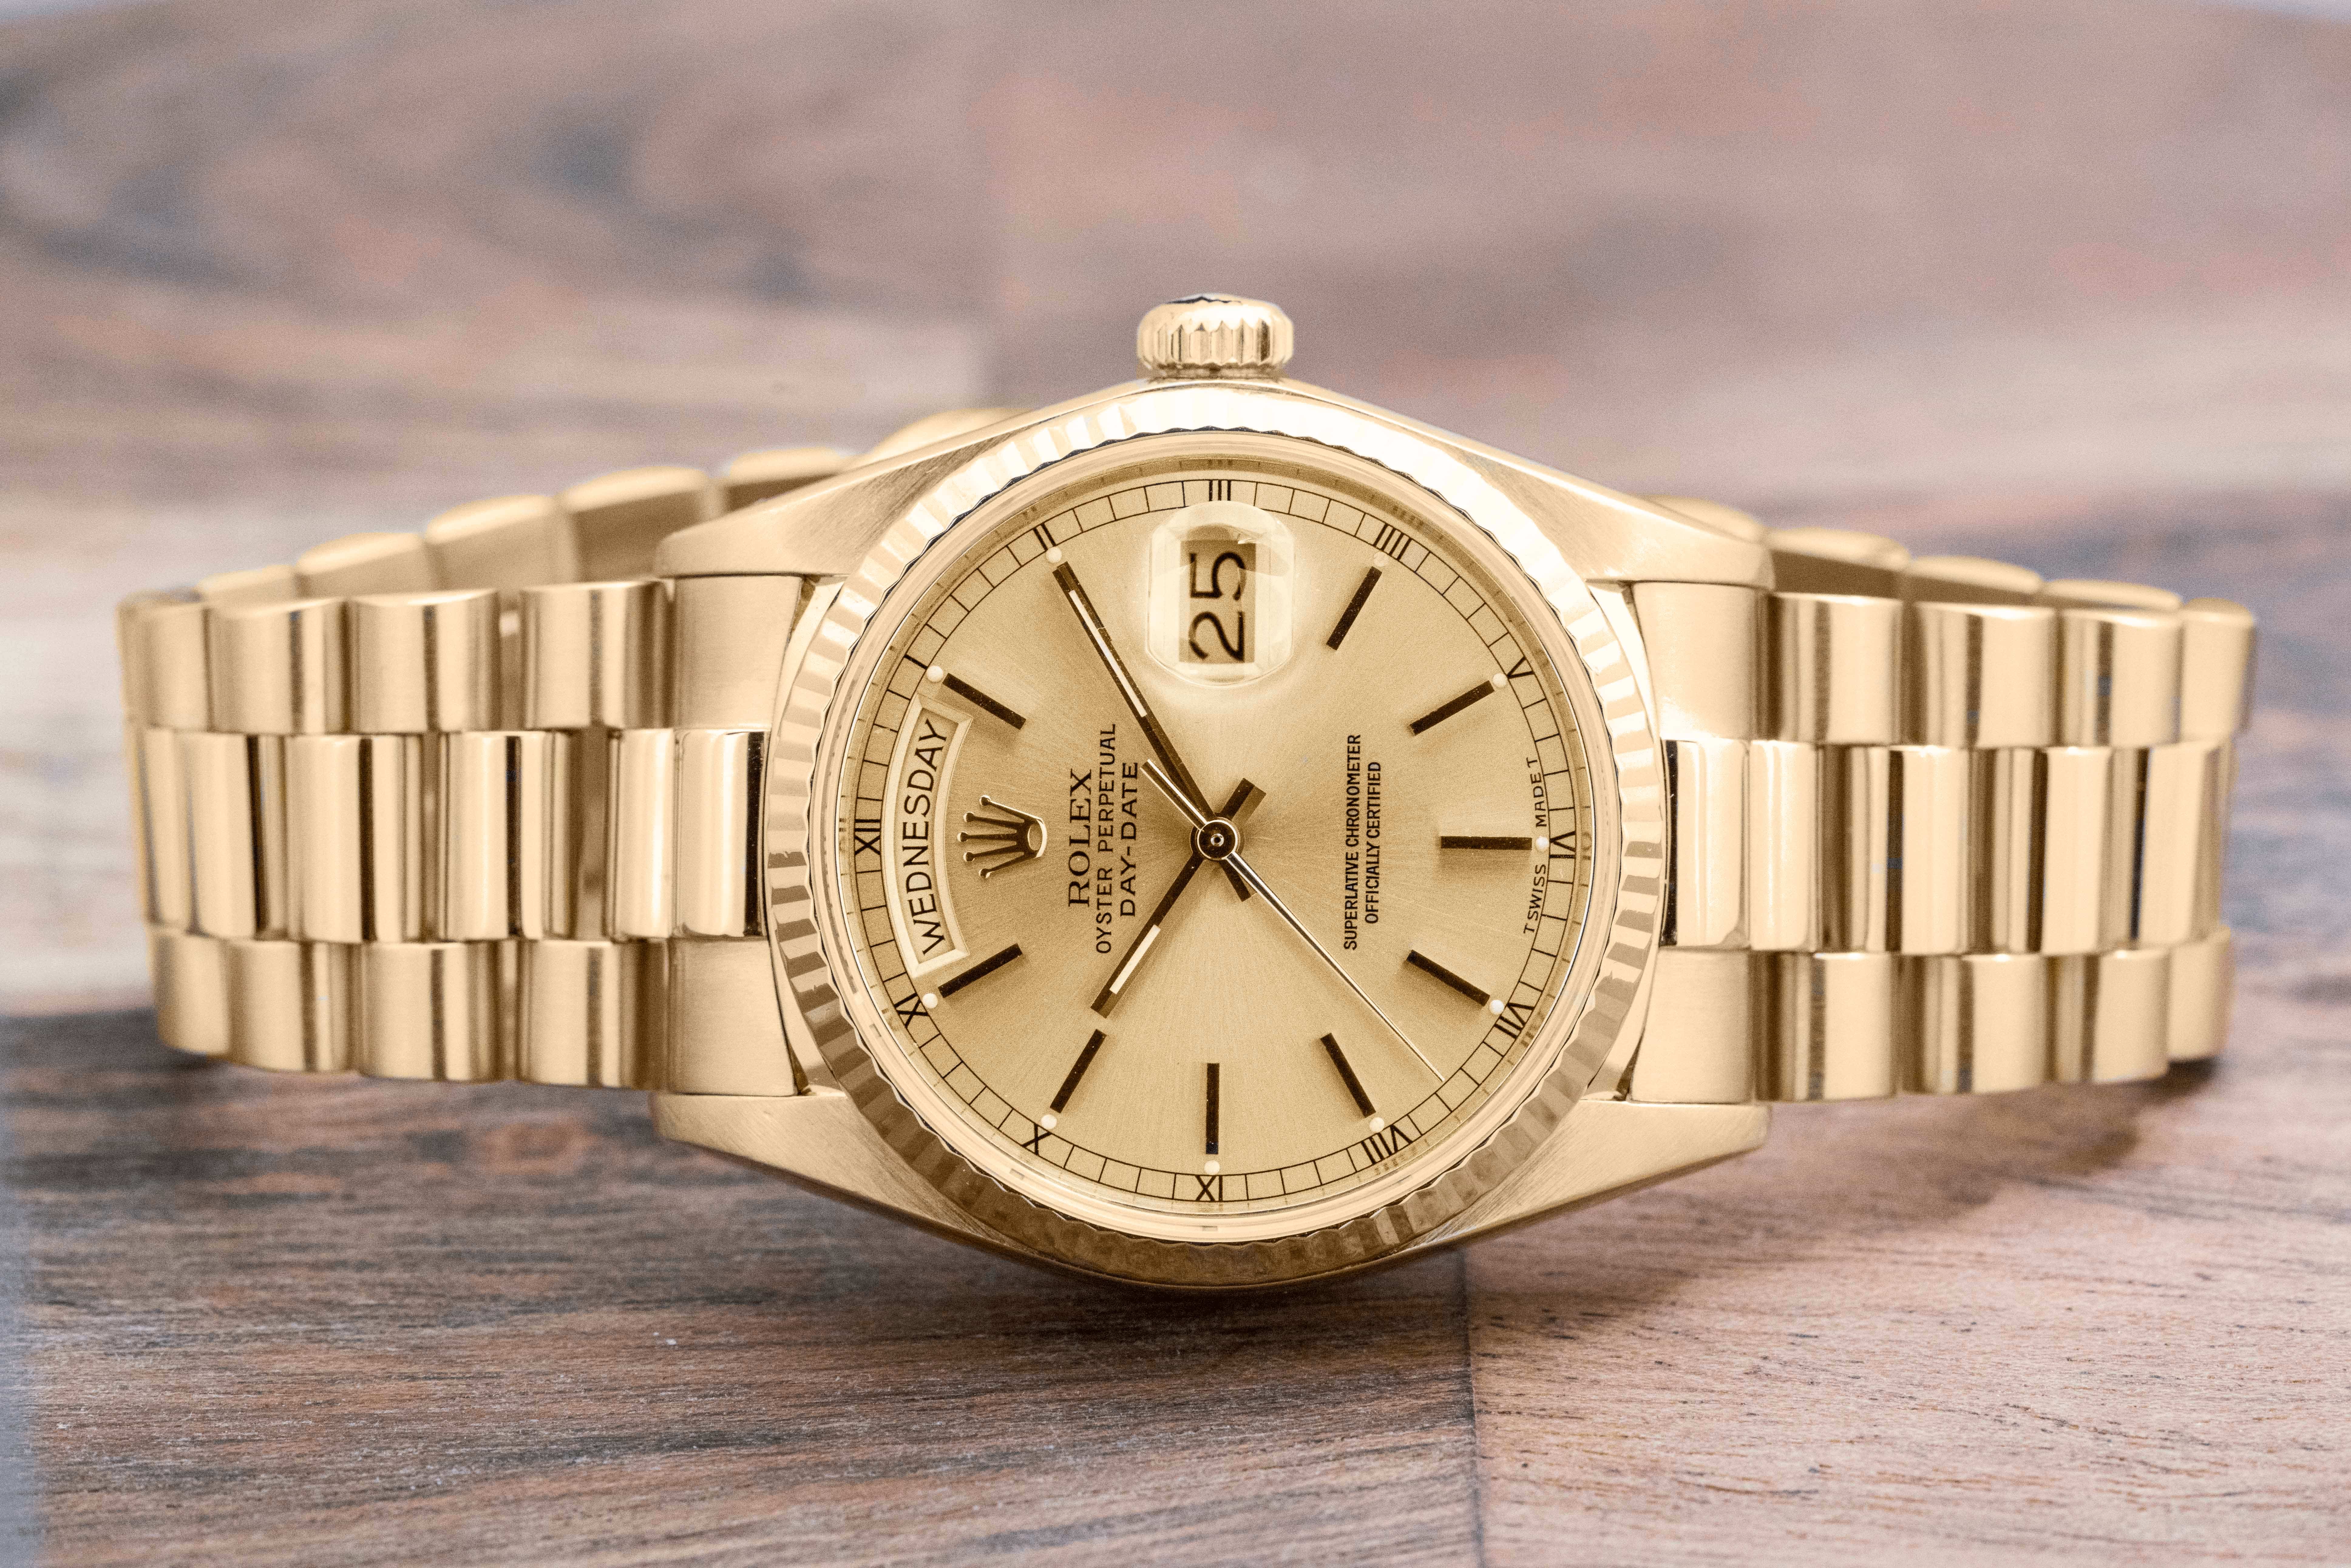 Pre-owned men’s Rolex Day-Date in yellow gold with gold dial.